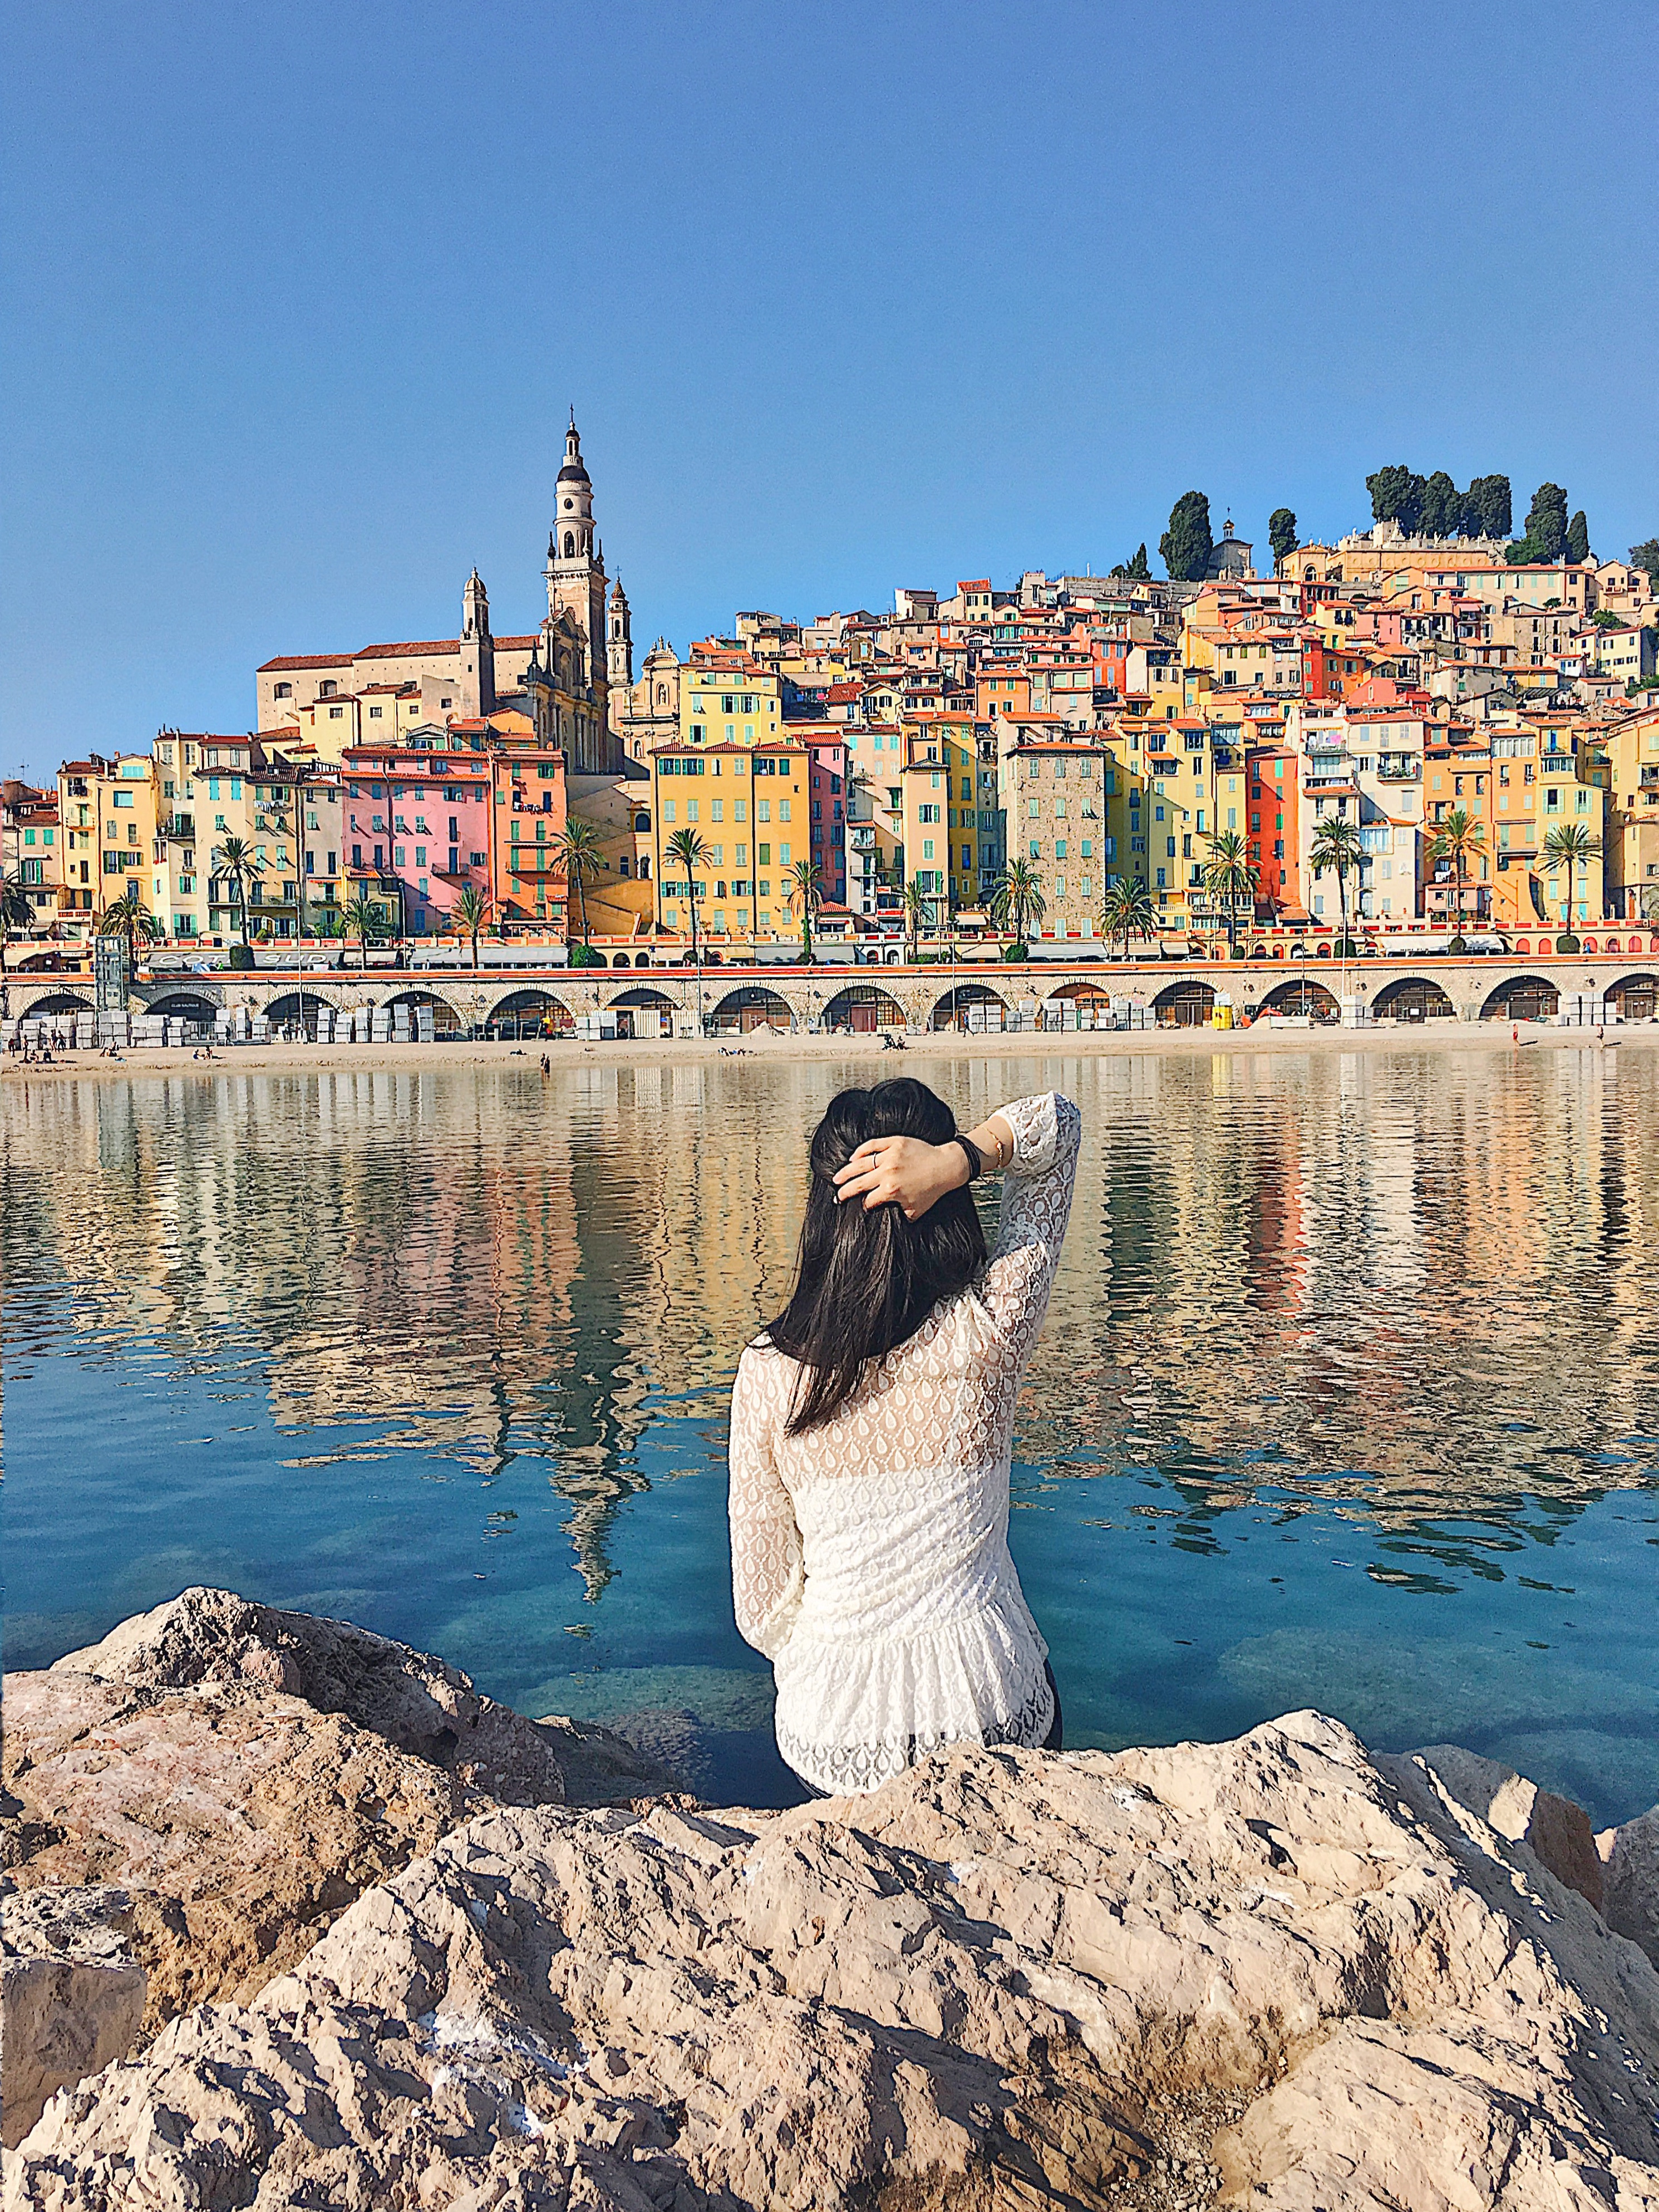 15 Photos to Inspire You to Visit Menton, France